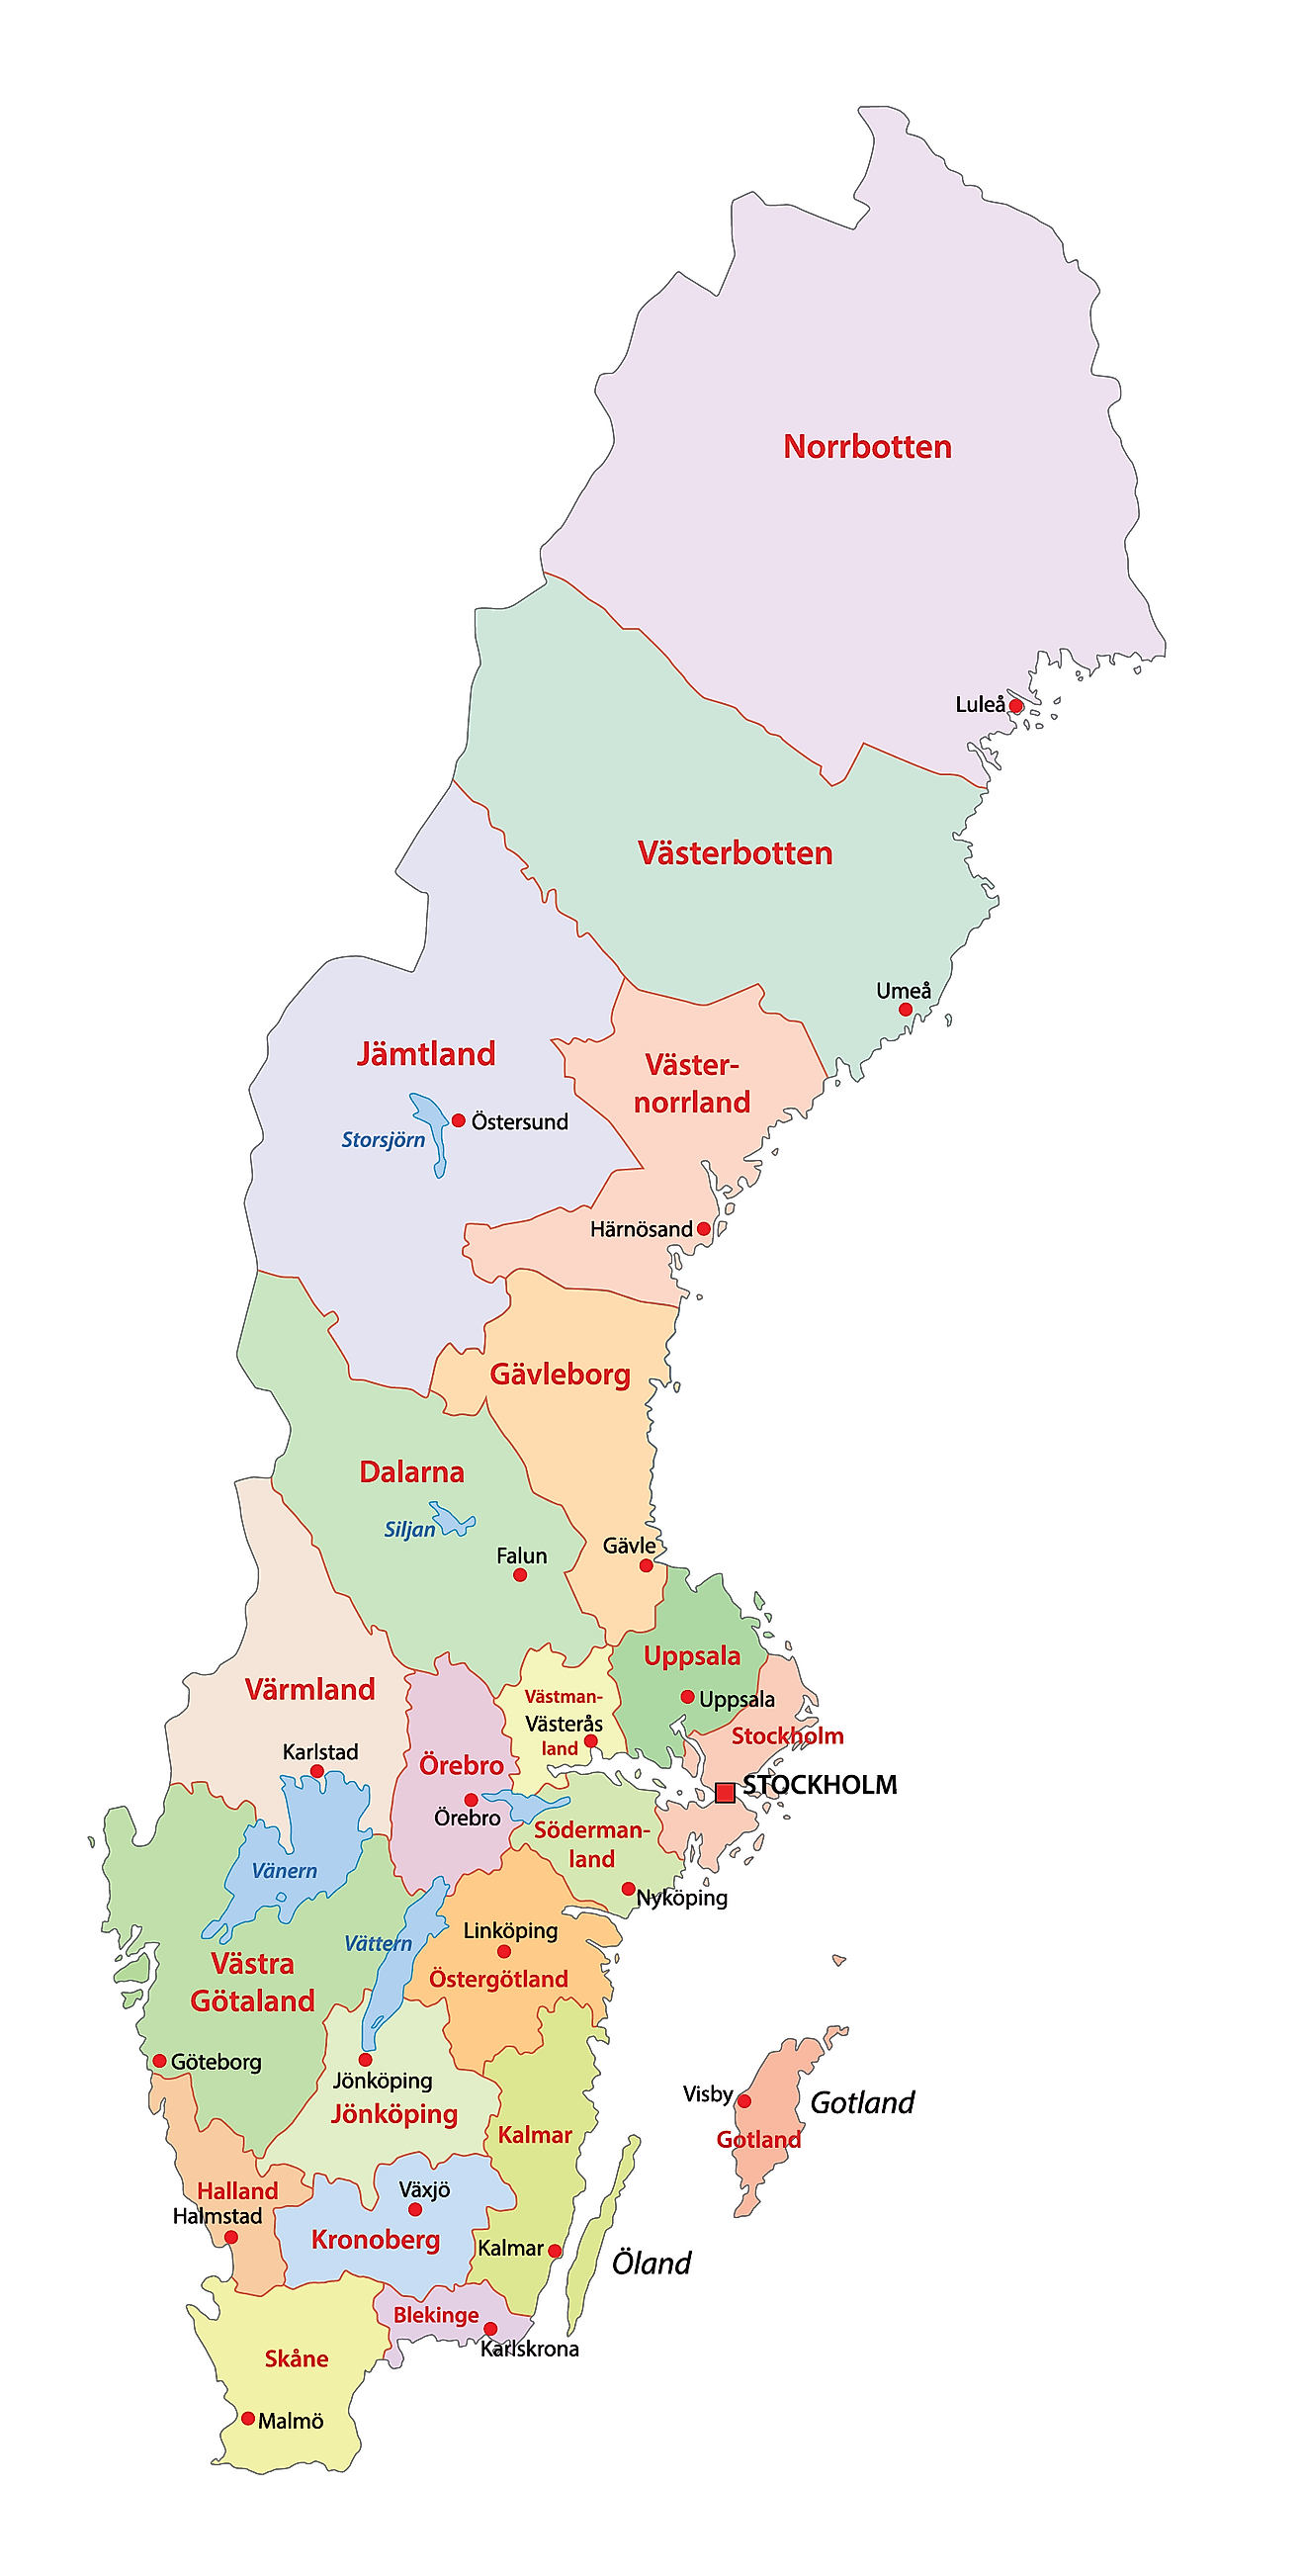 Political Map of Sweden showing 21 counties and the capital city of Stockholm. 